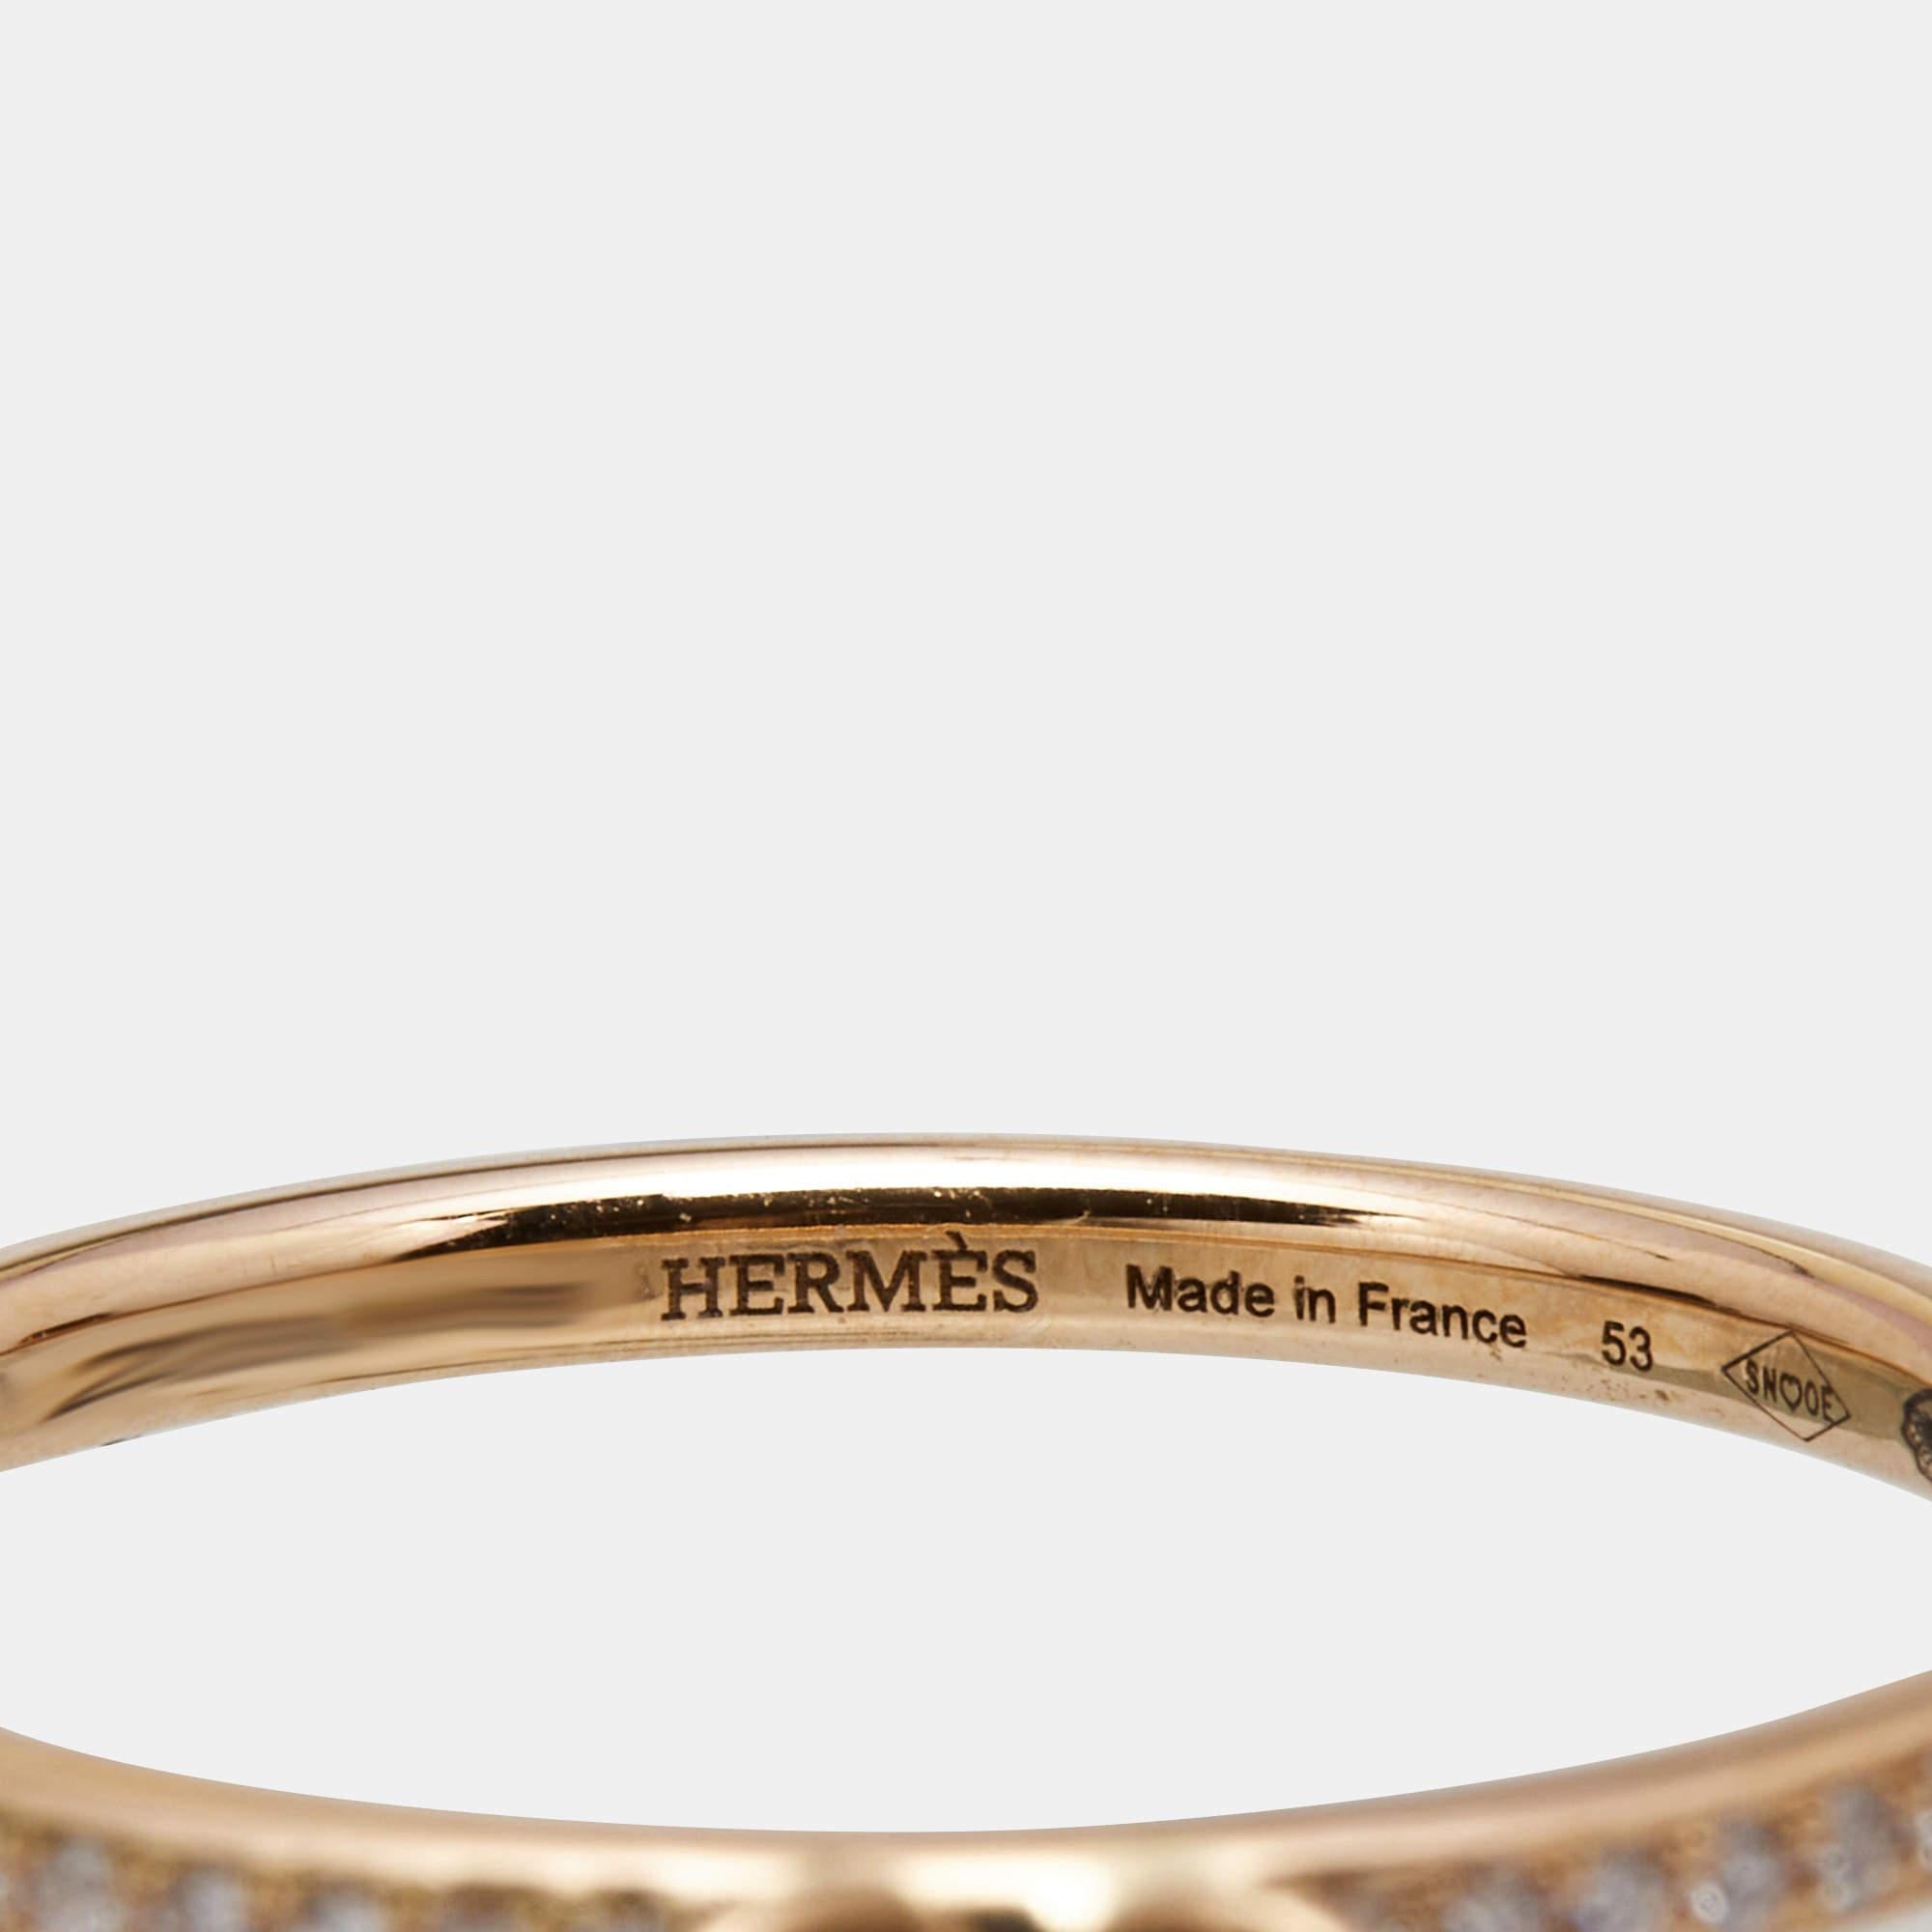 The Hermès ring exudes elegance and sophistication. Crafted with exquisite attention to detail, this captivating piece showcases a band of lustrous 18k rose gold adorned with a delicate clochette charm embellished with sparkling diamonds. A